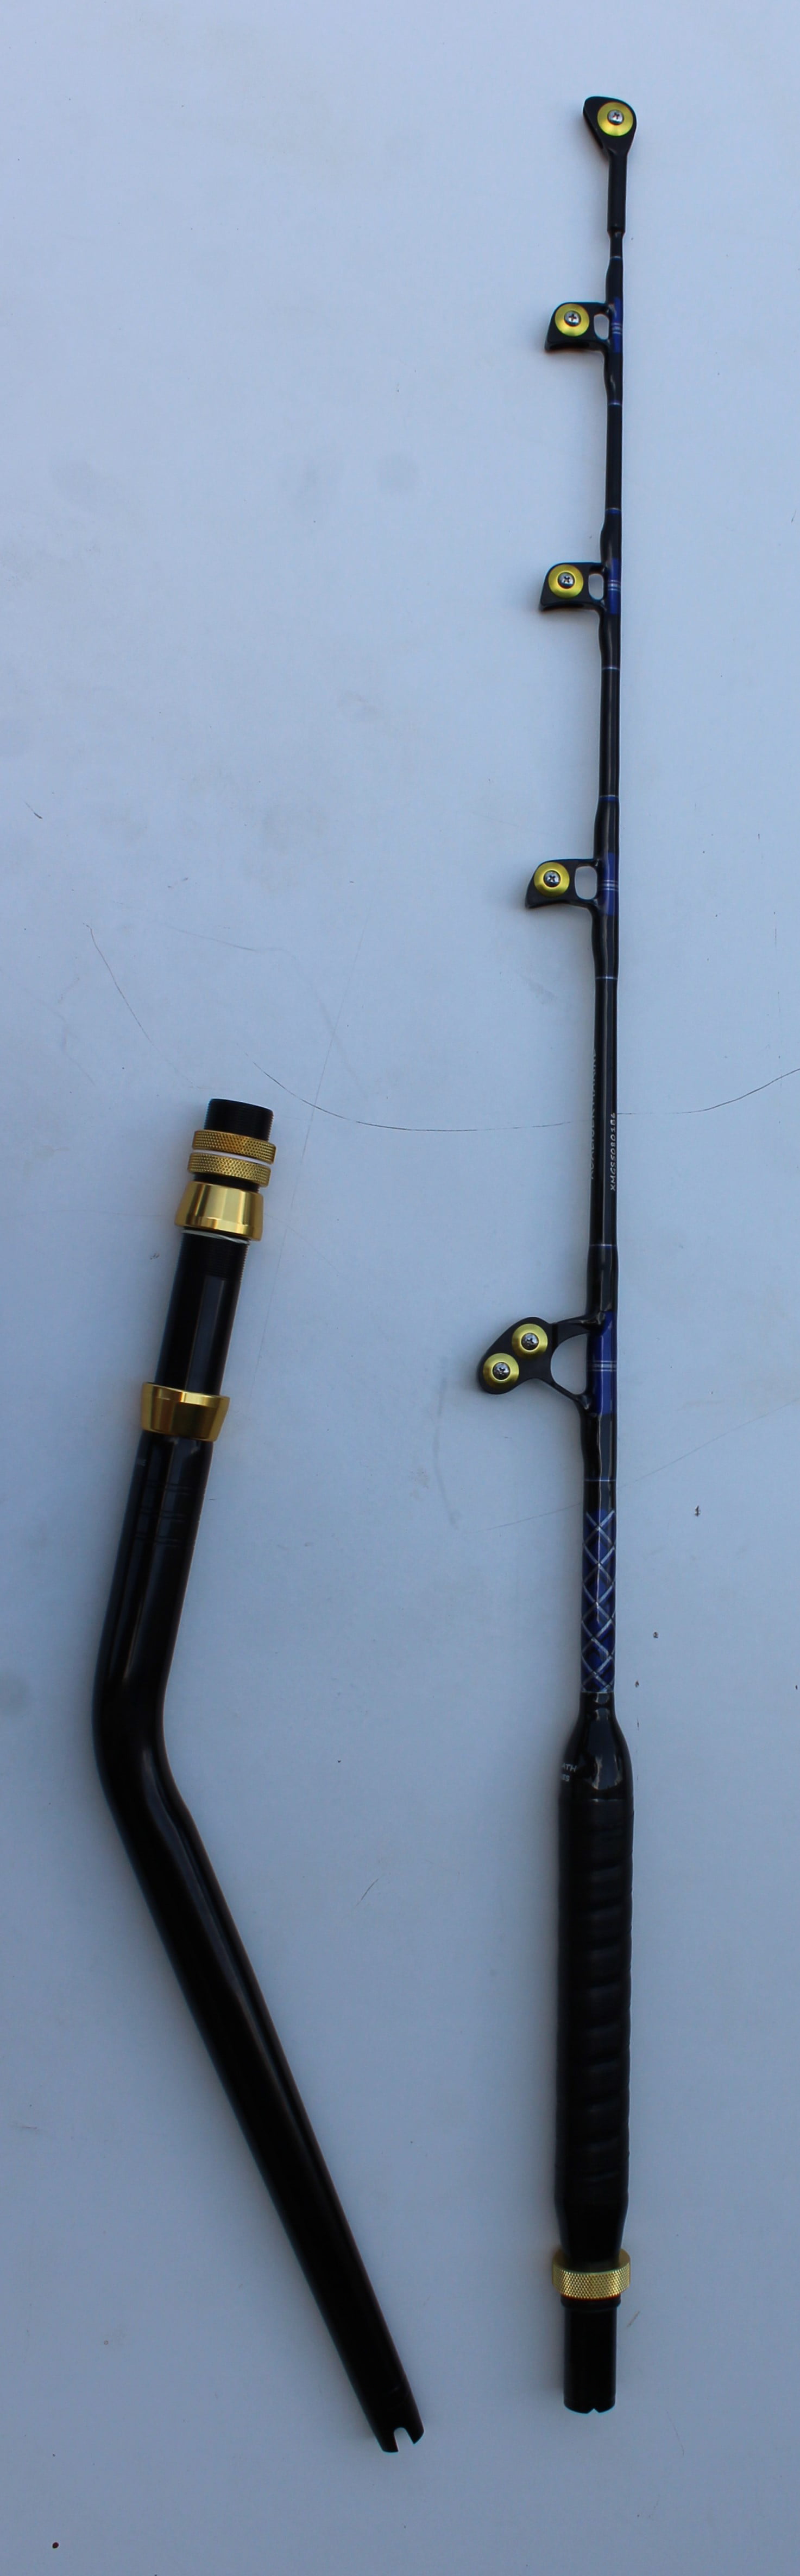 XCALIBER MARINE GOLIATH SERIES TROLLING ROD ROLLER GUIDES 50-80 LB RED AND GOLD 